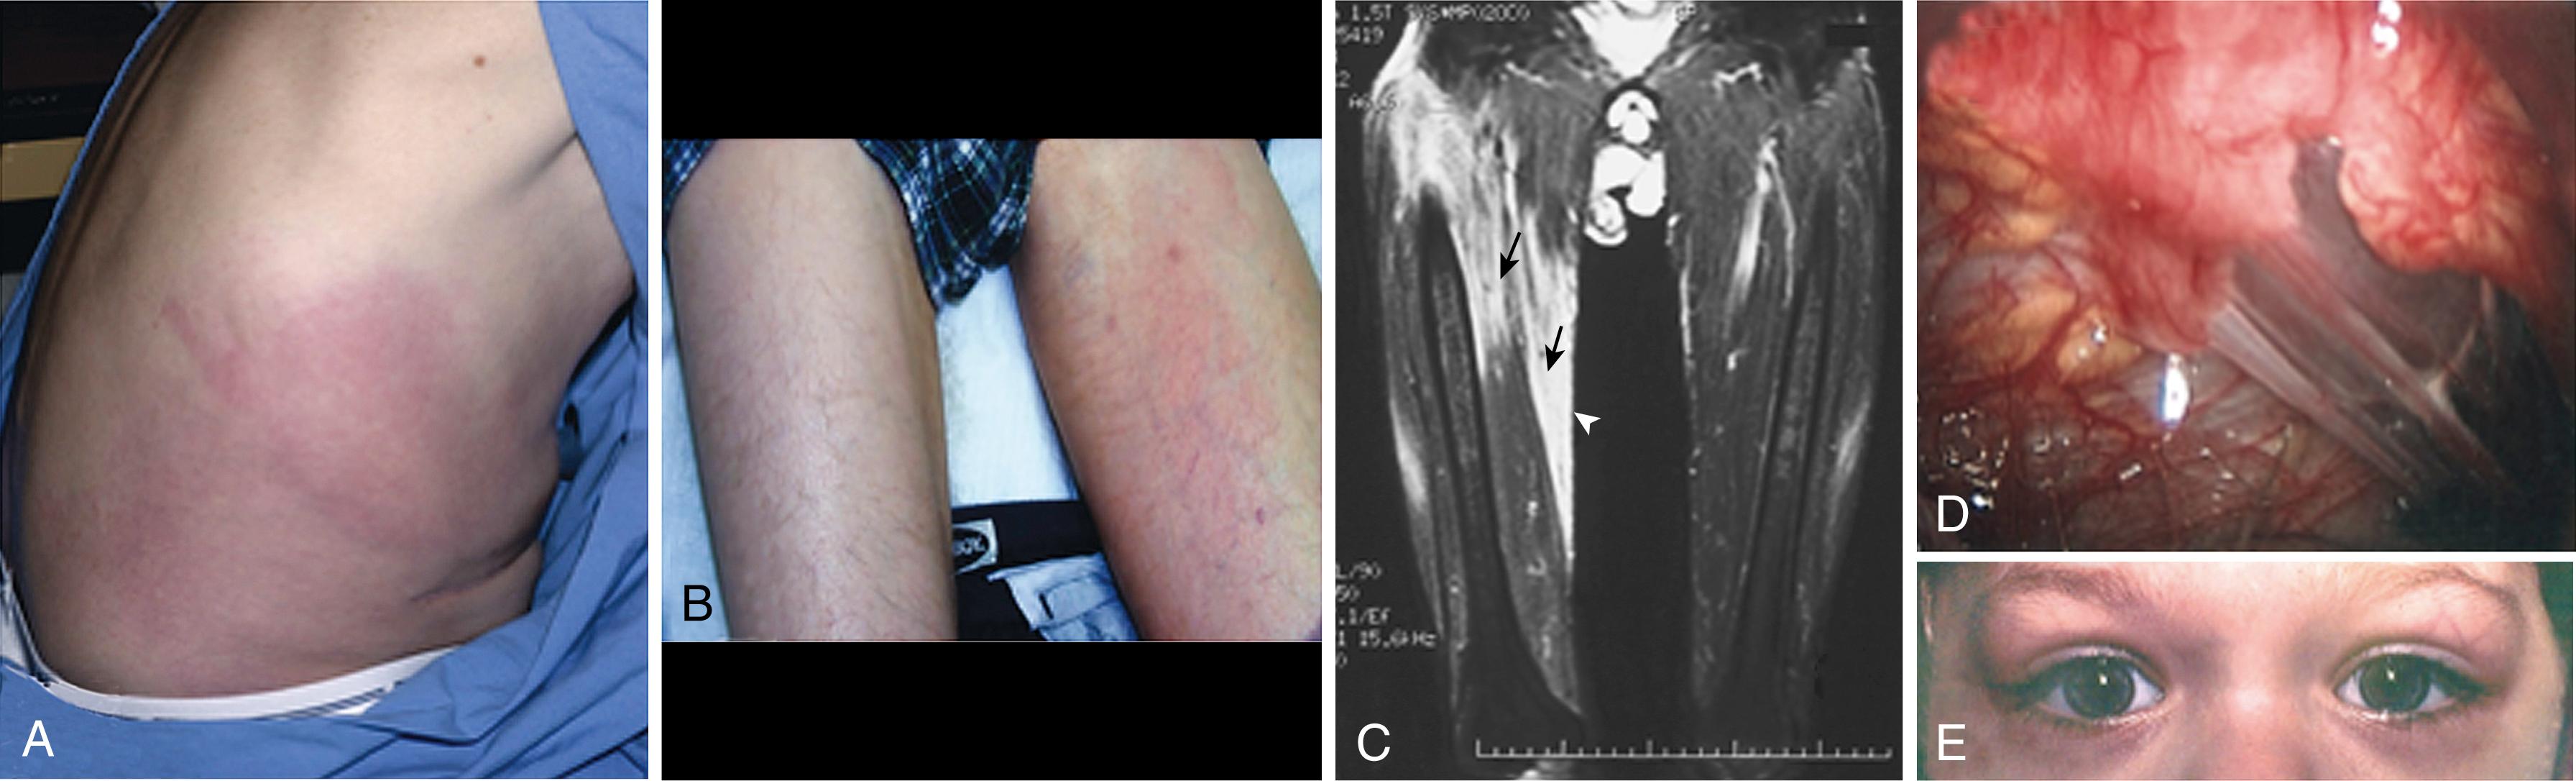 Fig. 54.6, Cutaneous findings associated with tumor necrosis factor receptor–associated periodic syndrome (TRAPS) may consist of macular areas of erythema on the torso (A) or on an extremity (B) . C, Sagittal views of the proximal thighs of a TRAPS patient demonstrating edematous changes within muscle compartments (black arrows) , here and extending to the skin (white arrows). D, Peritoneal inflammation can lead to adhesions. E, Periorbital edema is commonly observed in TRAPS patients during a flare.